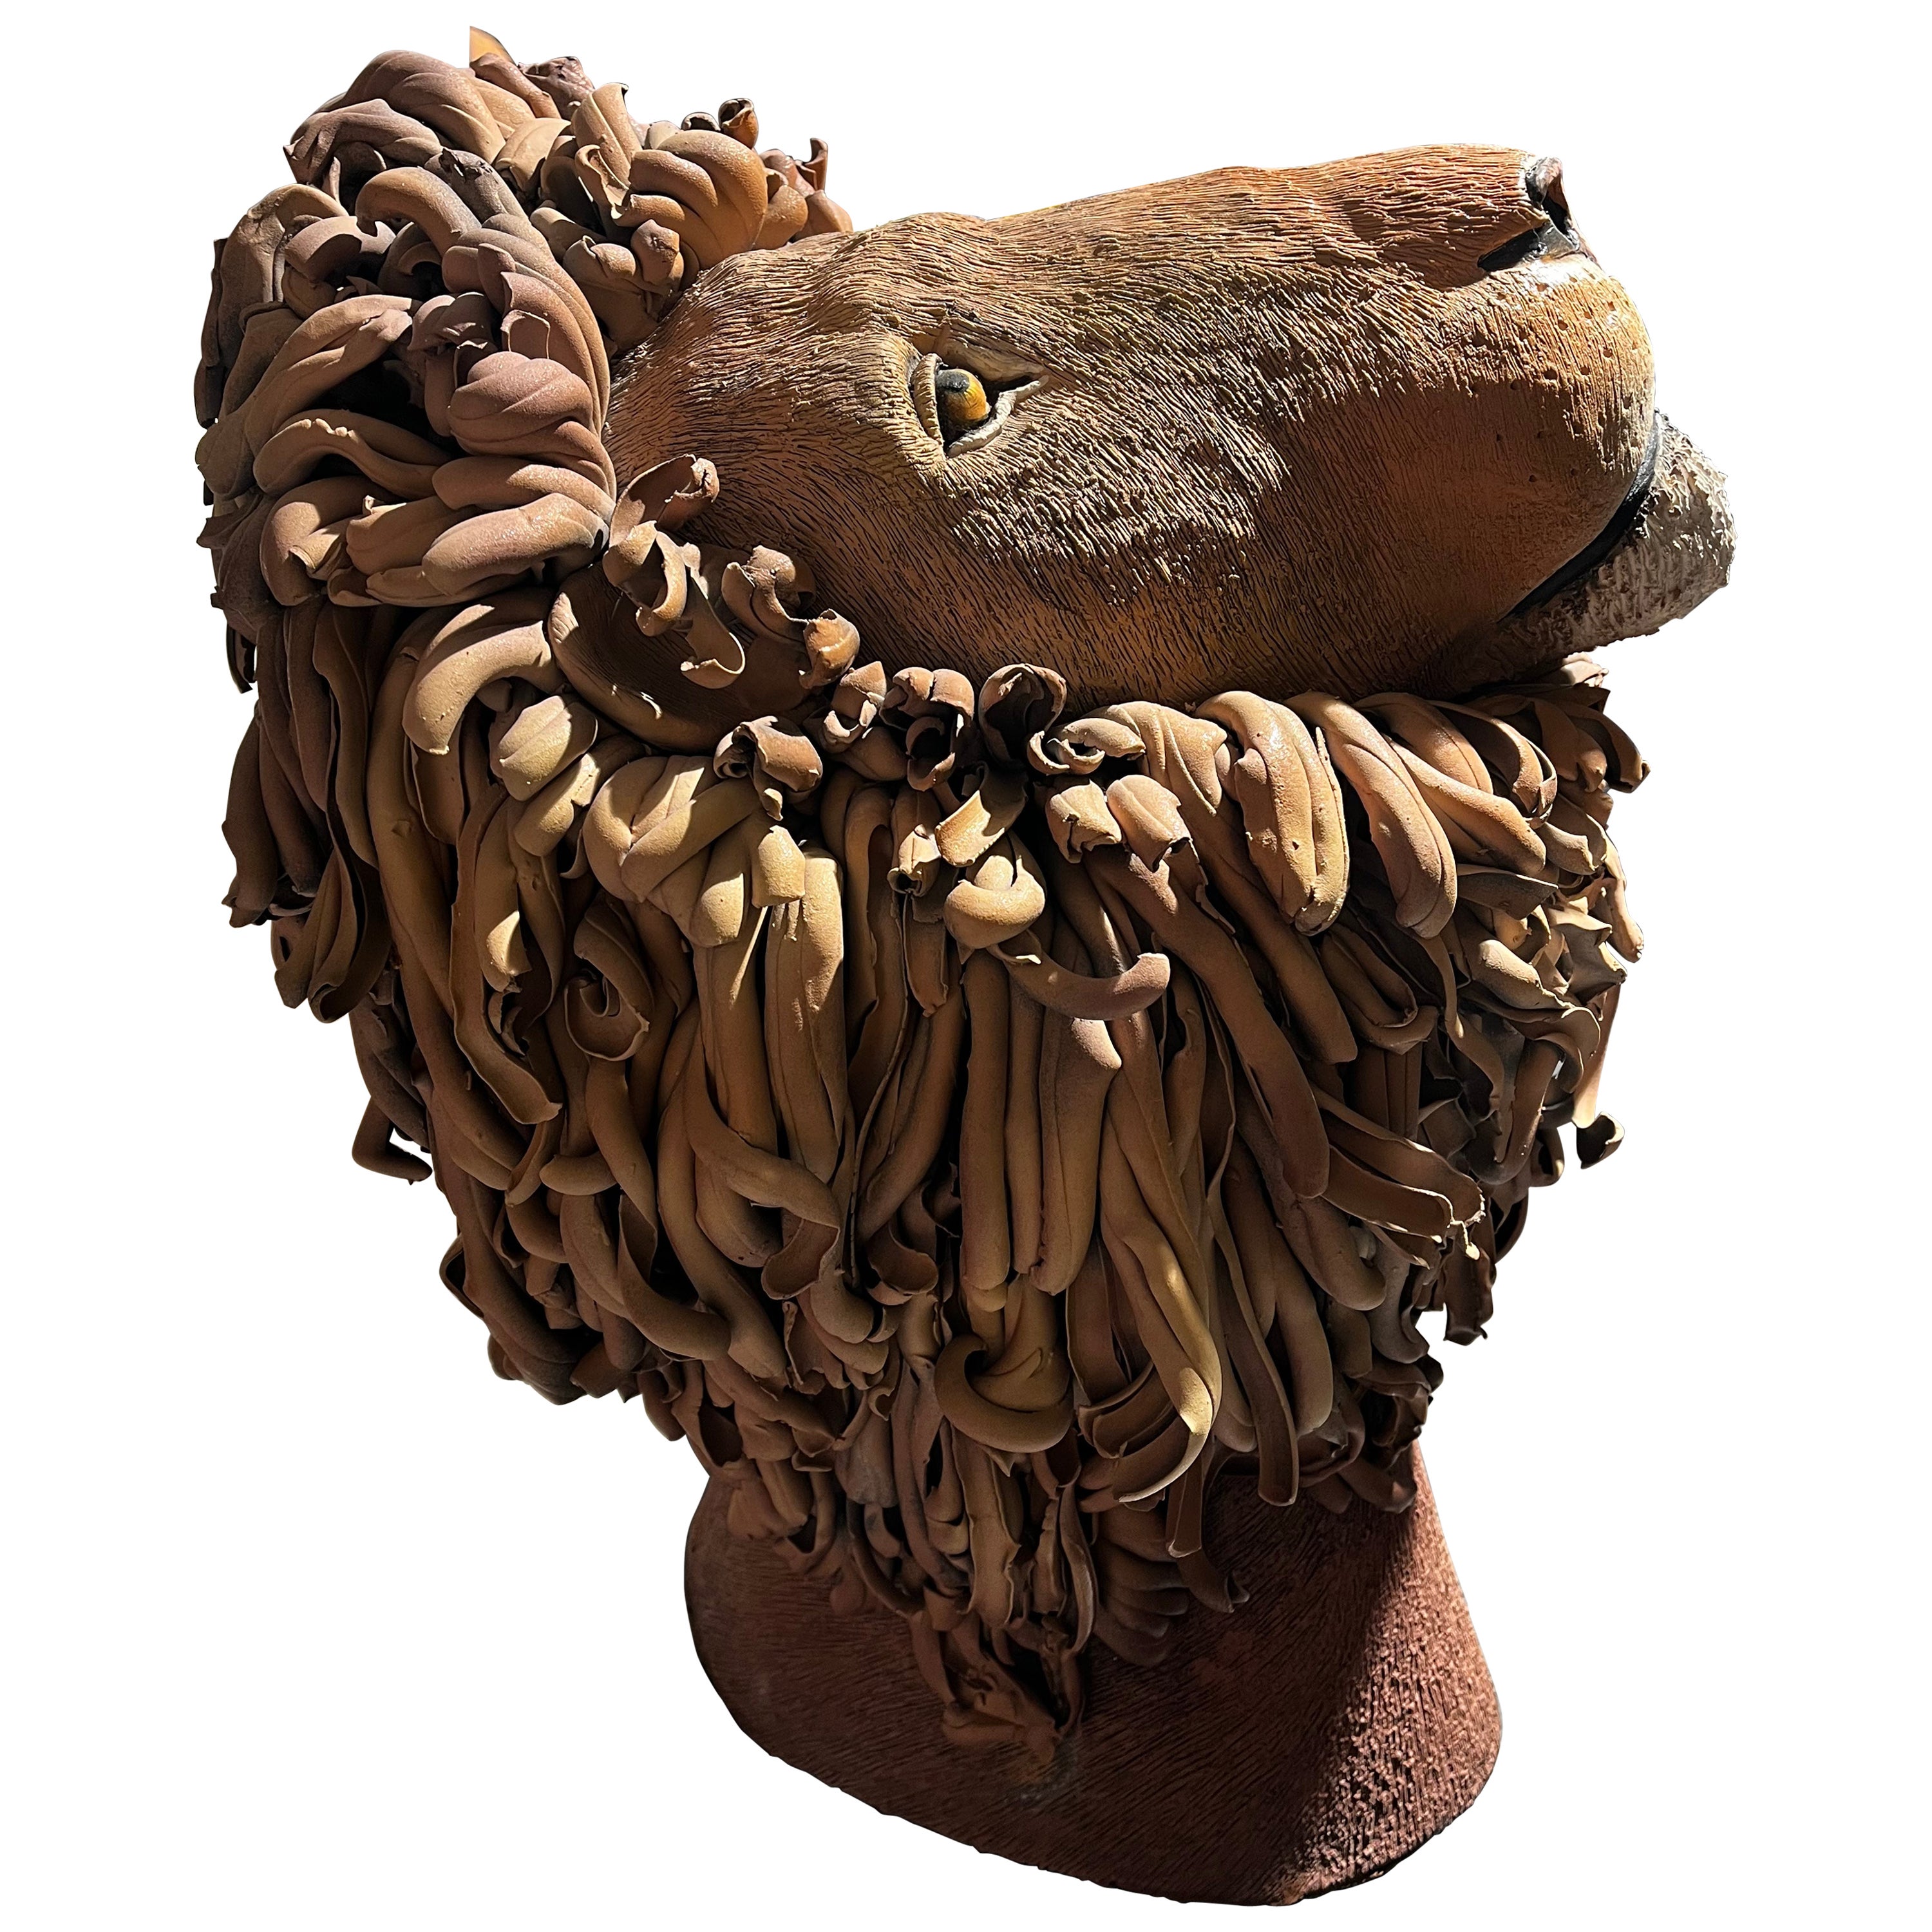 Brown Lion Ceramic Sculpture Centerpiece, Completely Handmade Without Mold. 2023